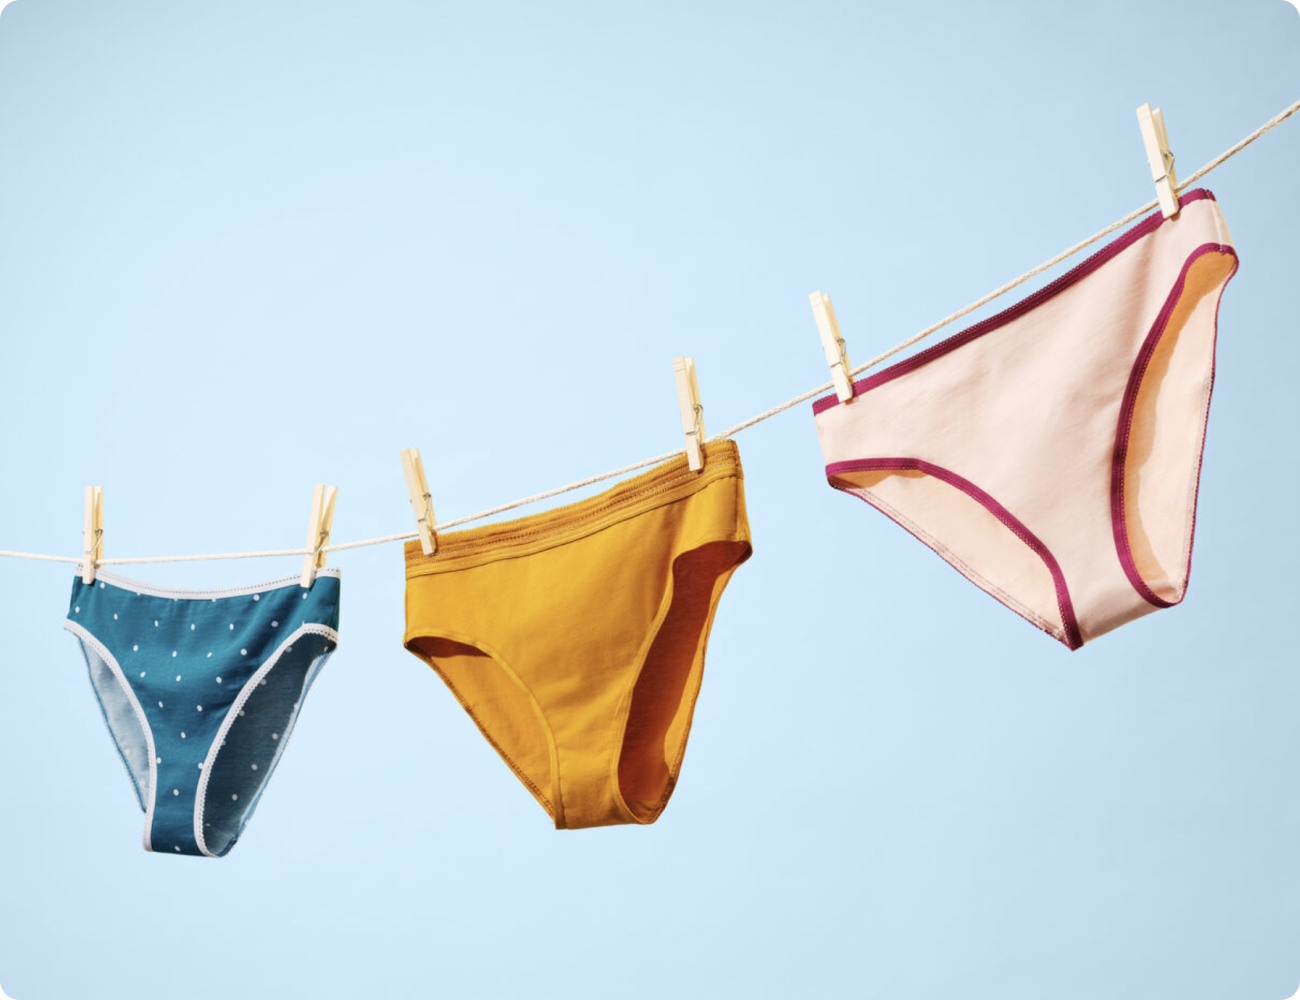 Panties Definition & Meaning